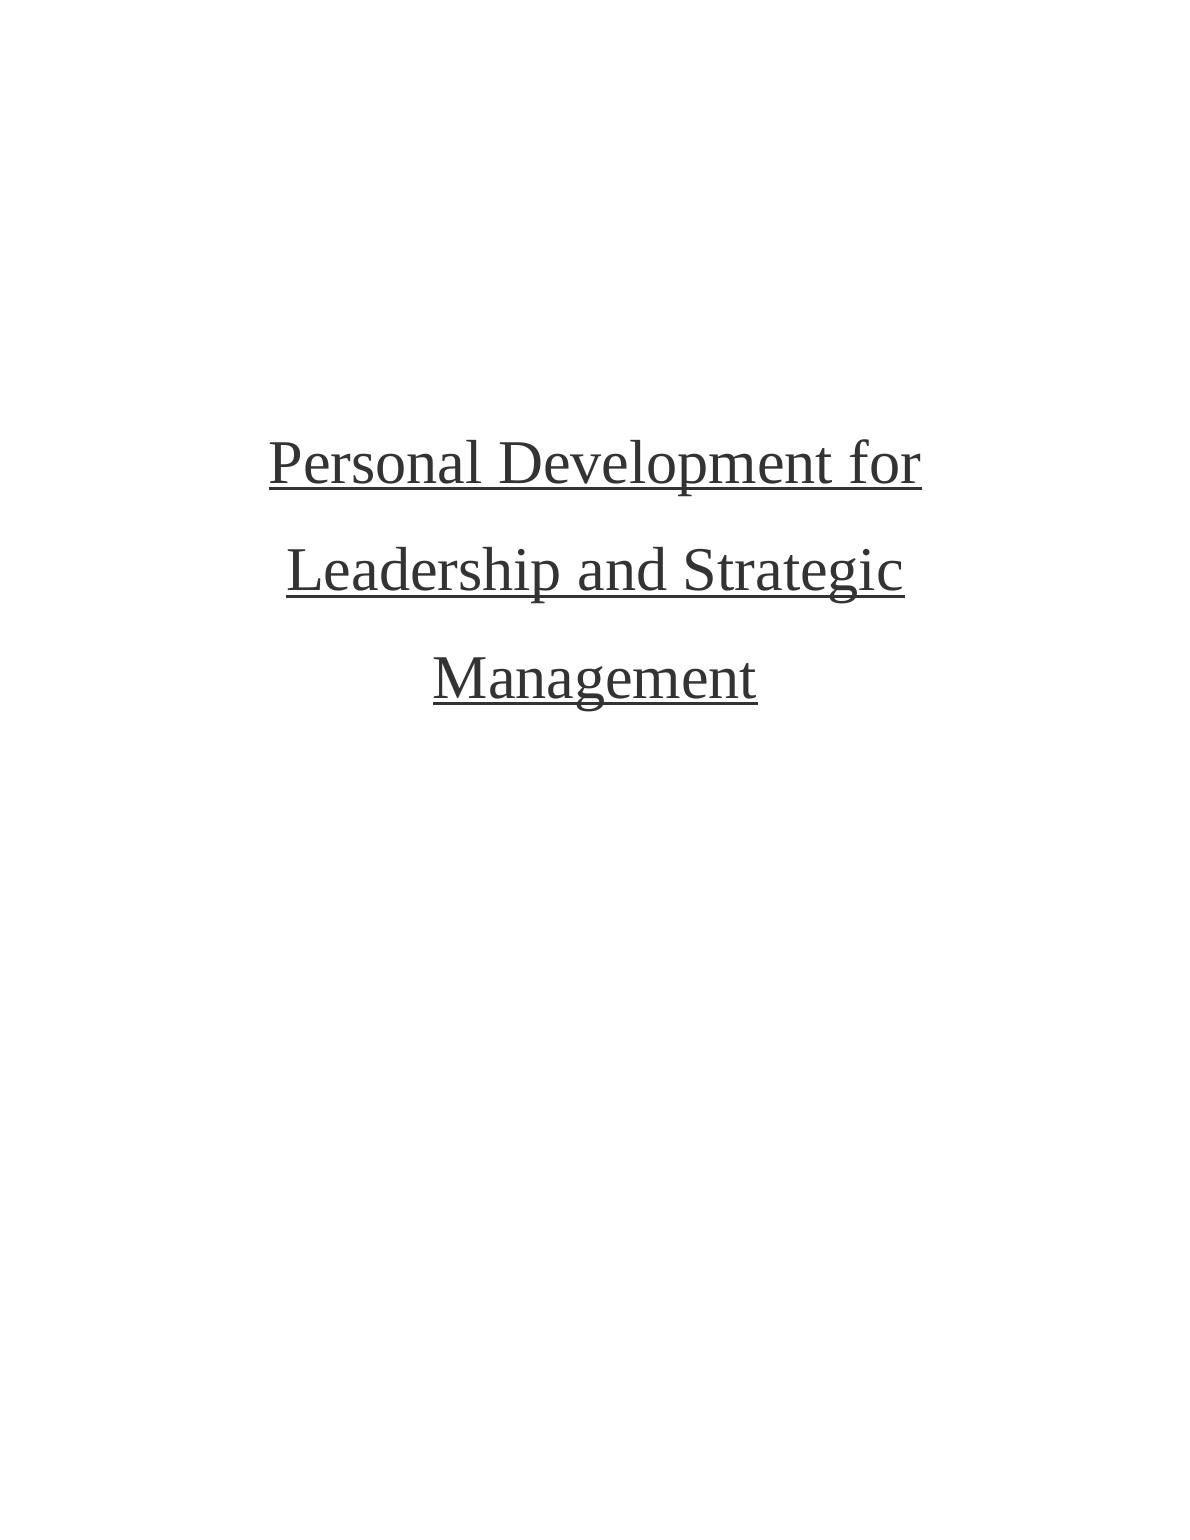 personal development for leadership and strategic management assignment